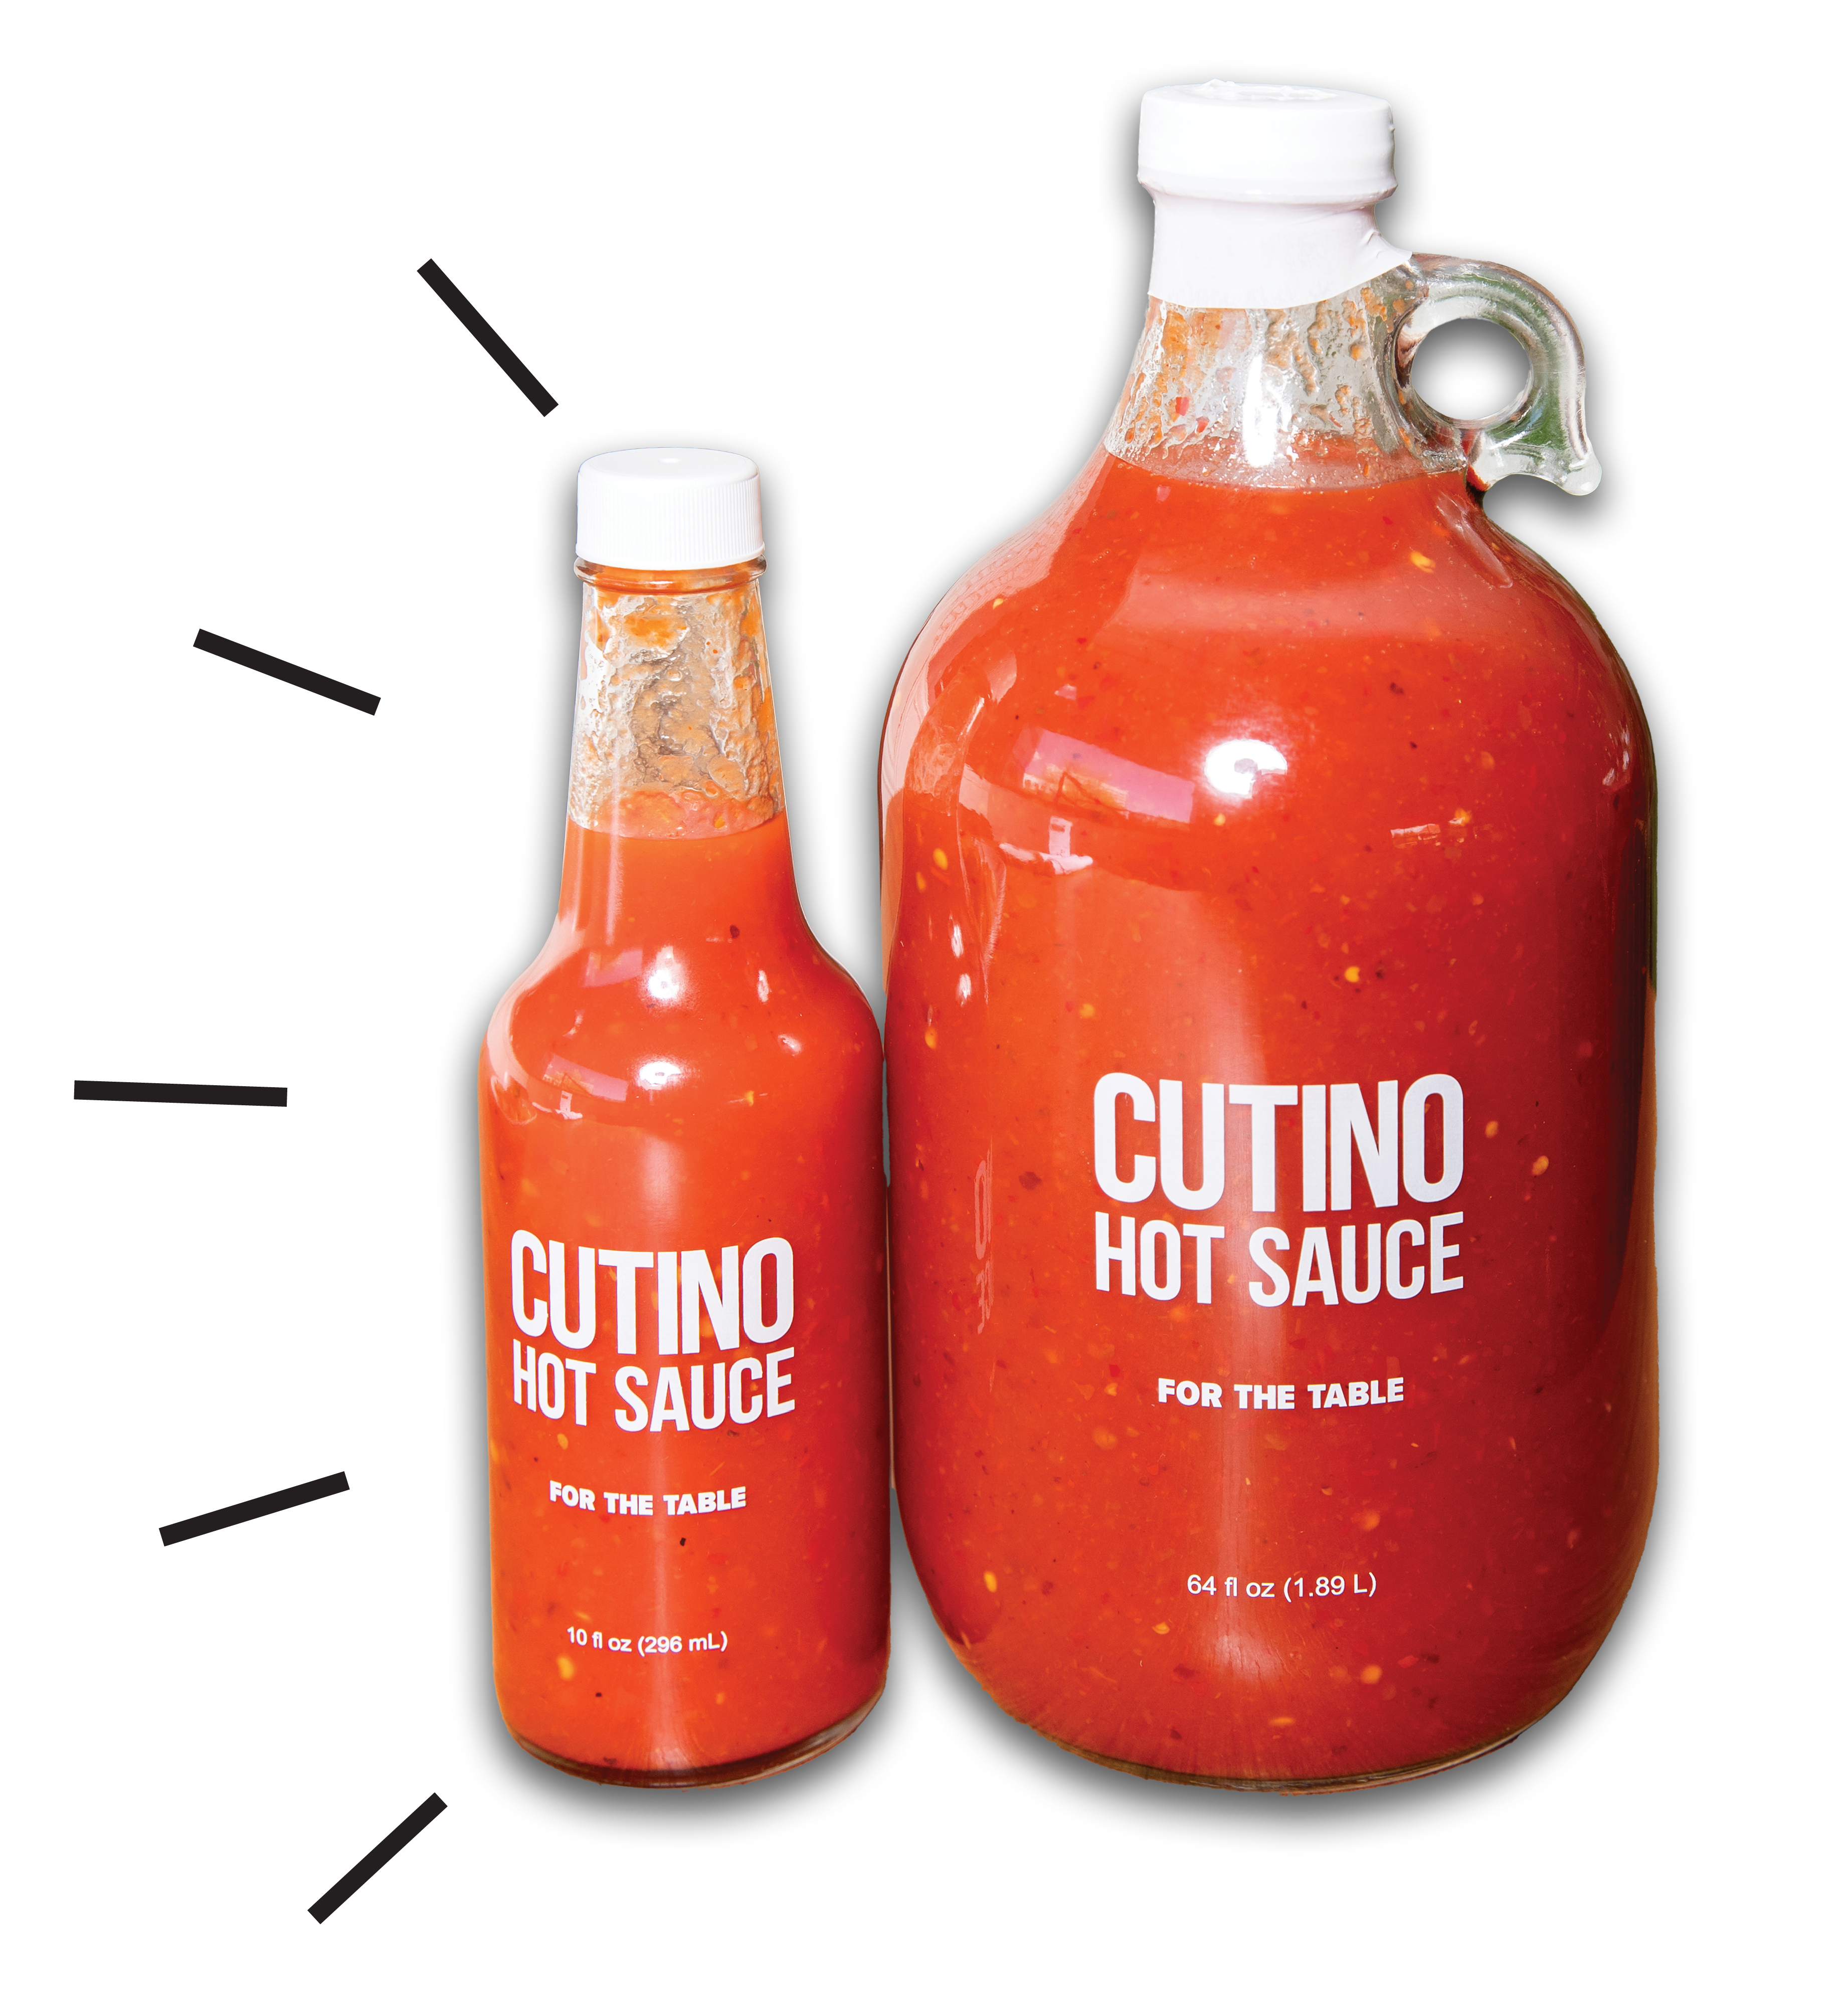 Cutino Sauce for your Restaurant Table